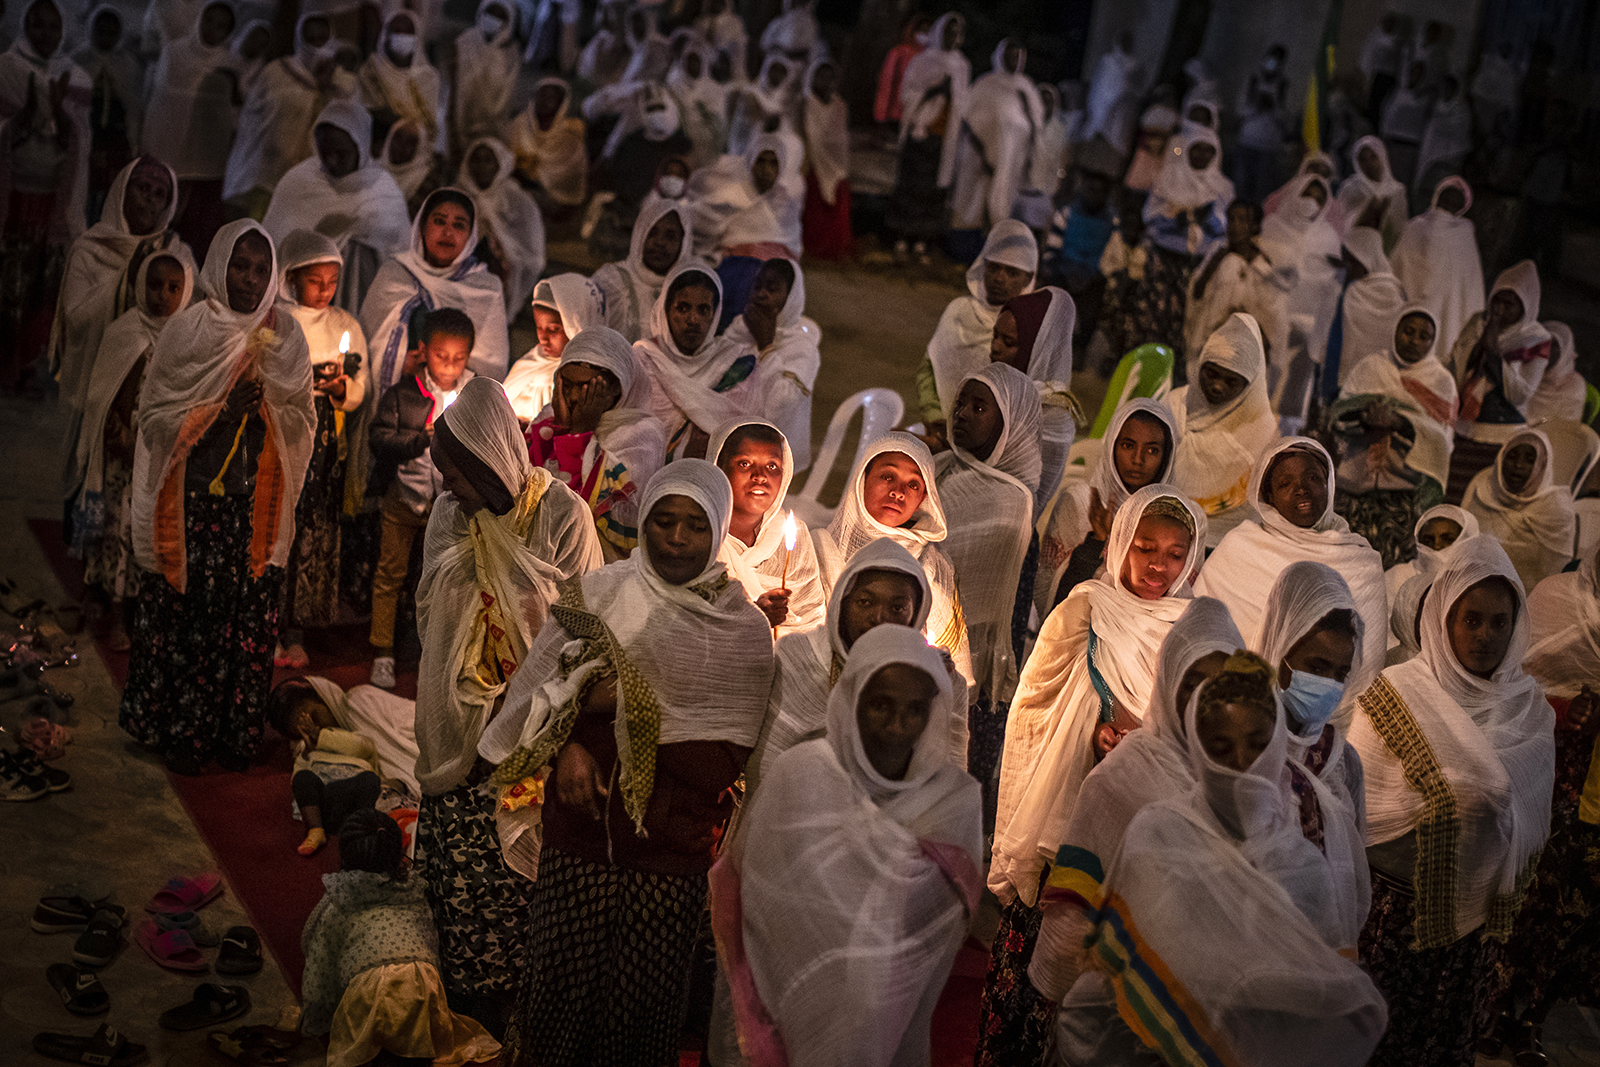 Ethiopian Orthodox Christians hold candles to celebrate the festival of Senay Mikael, or the Feast of St. Michael, as they listen to a sermon at St. Michael Church in the Intoto neighborhood on the outskirts of Addis Ababa, Ethiopia, Saturday, June 19, 2021. As well as celebrating the festival, priests prayed for peace in the country and in upcoming elections. (AP Photo/Ben Curtis)